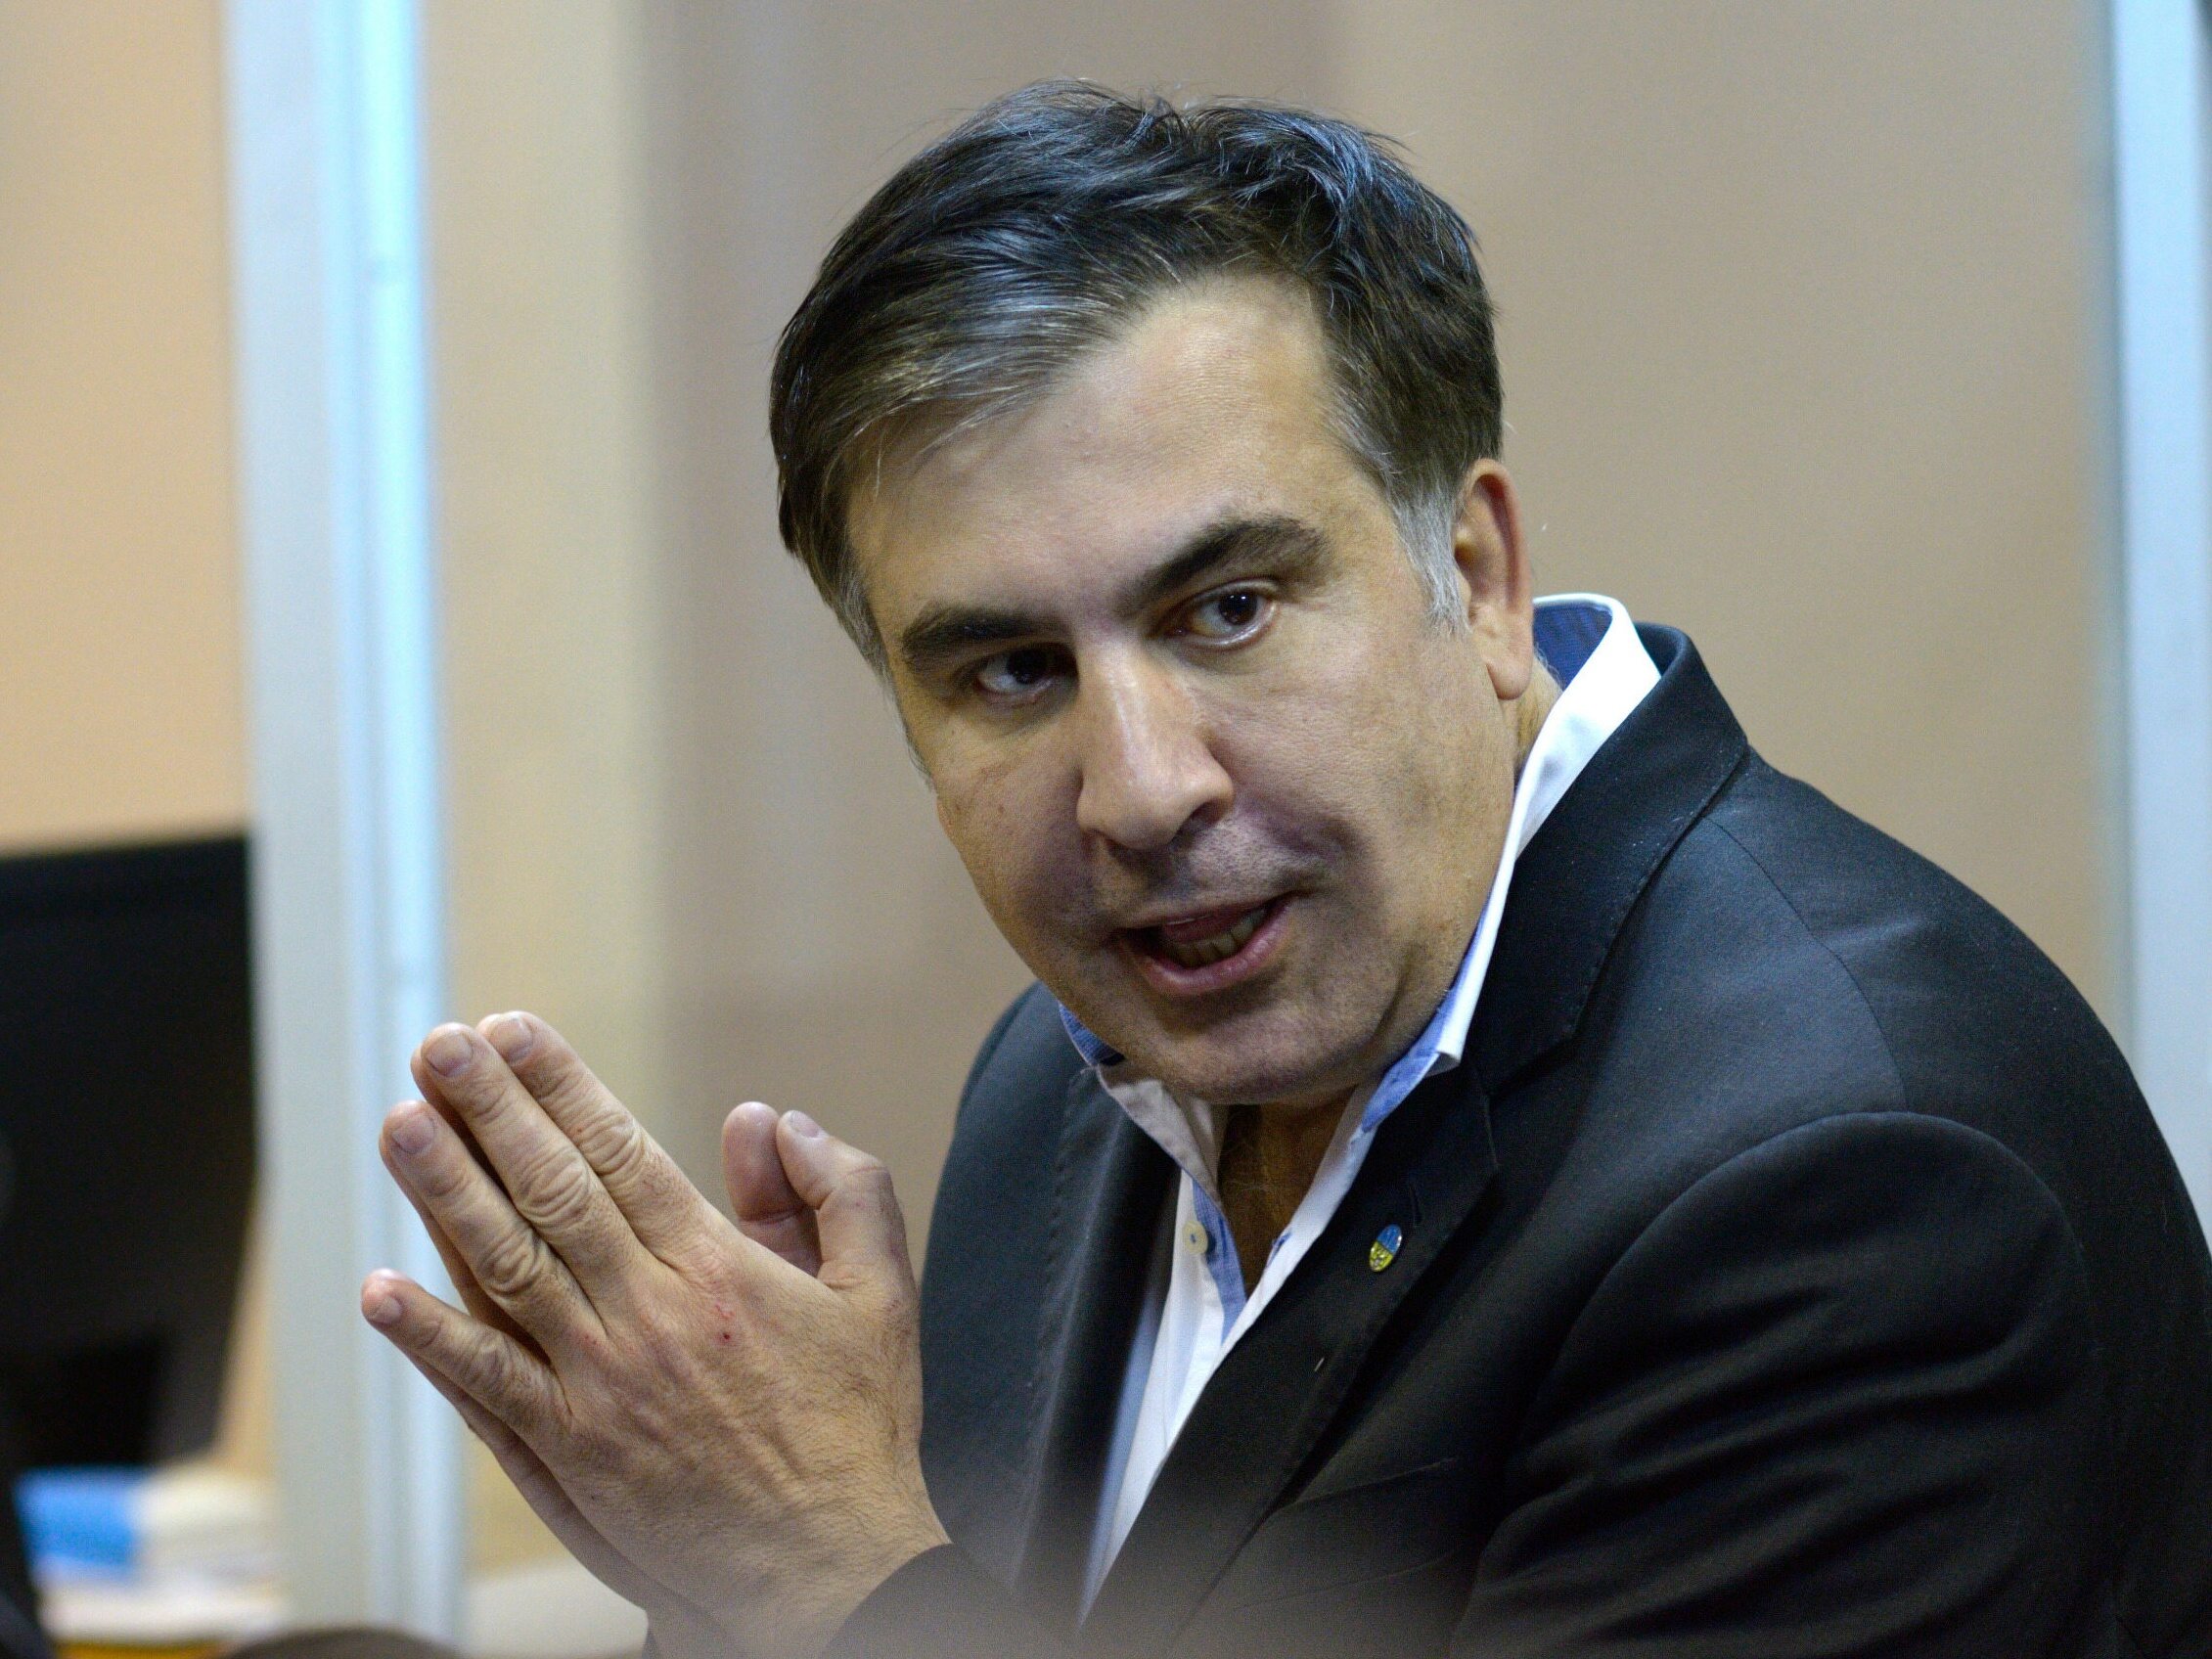 Seym demands Saakashvili.  Members of Parliament from the Confederation – Wprost objected